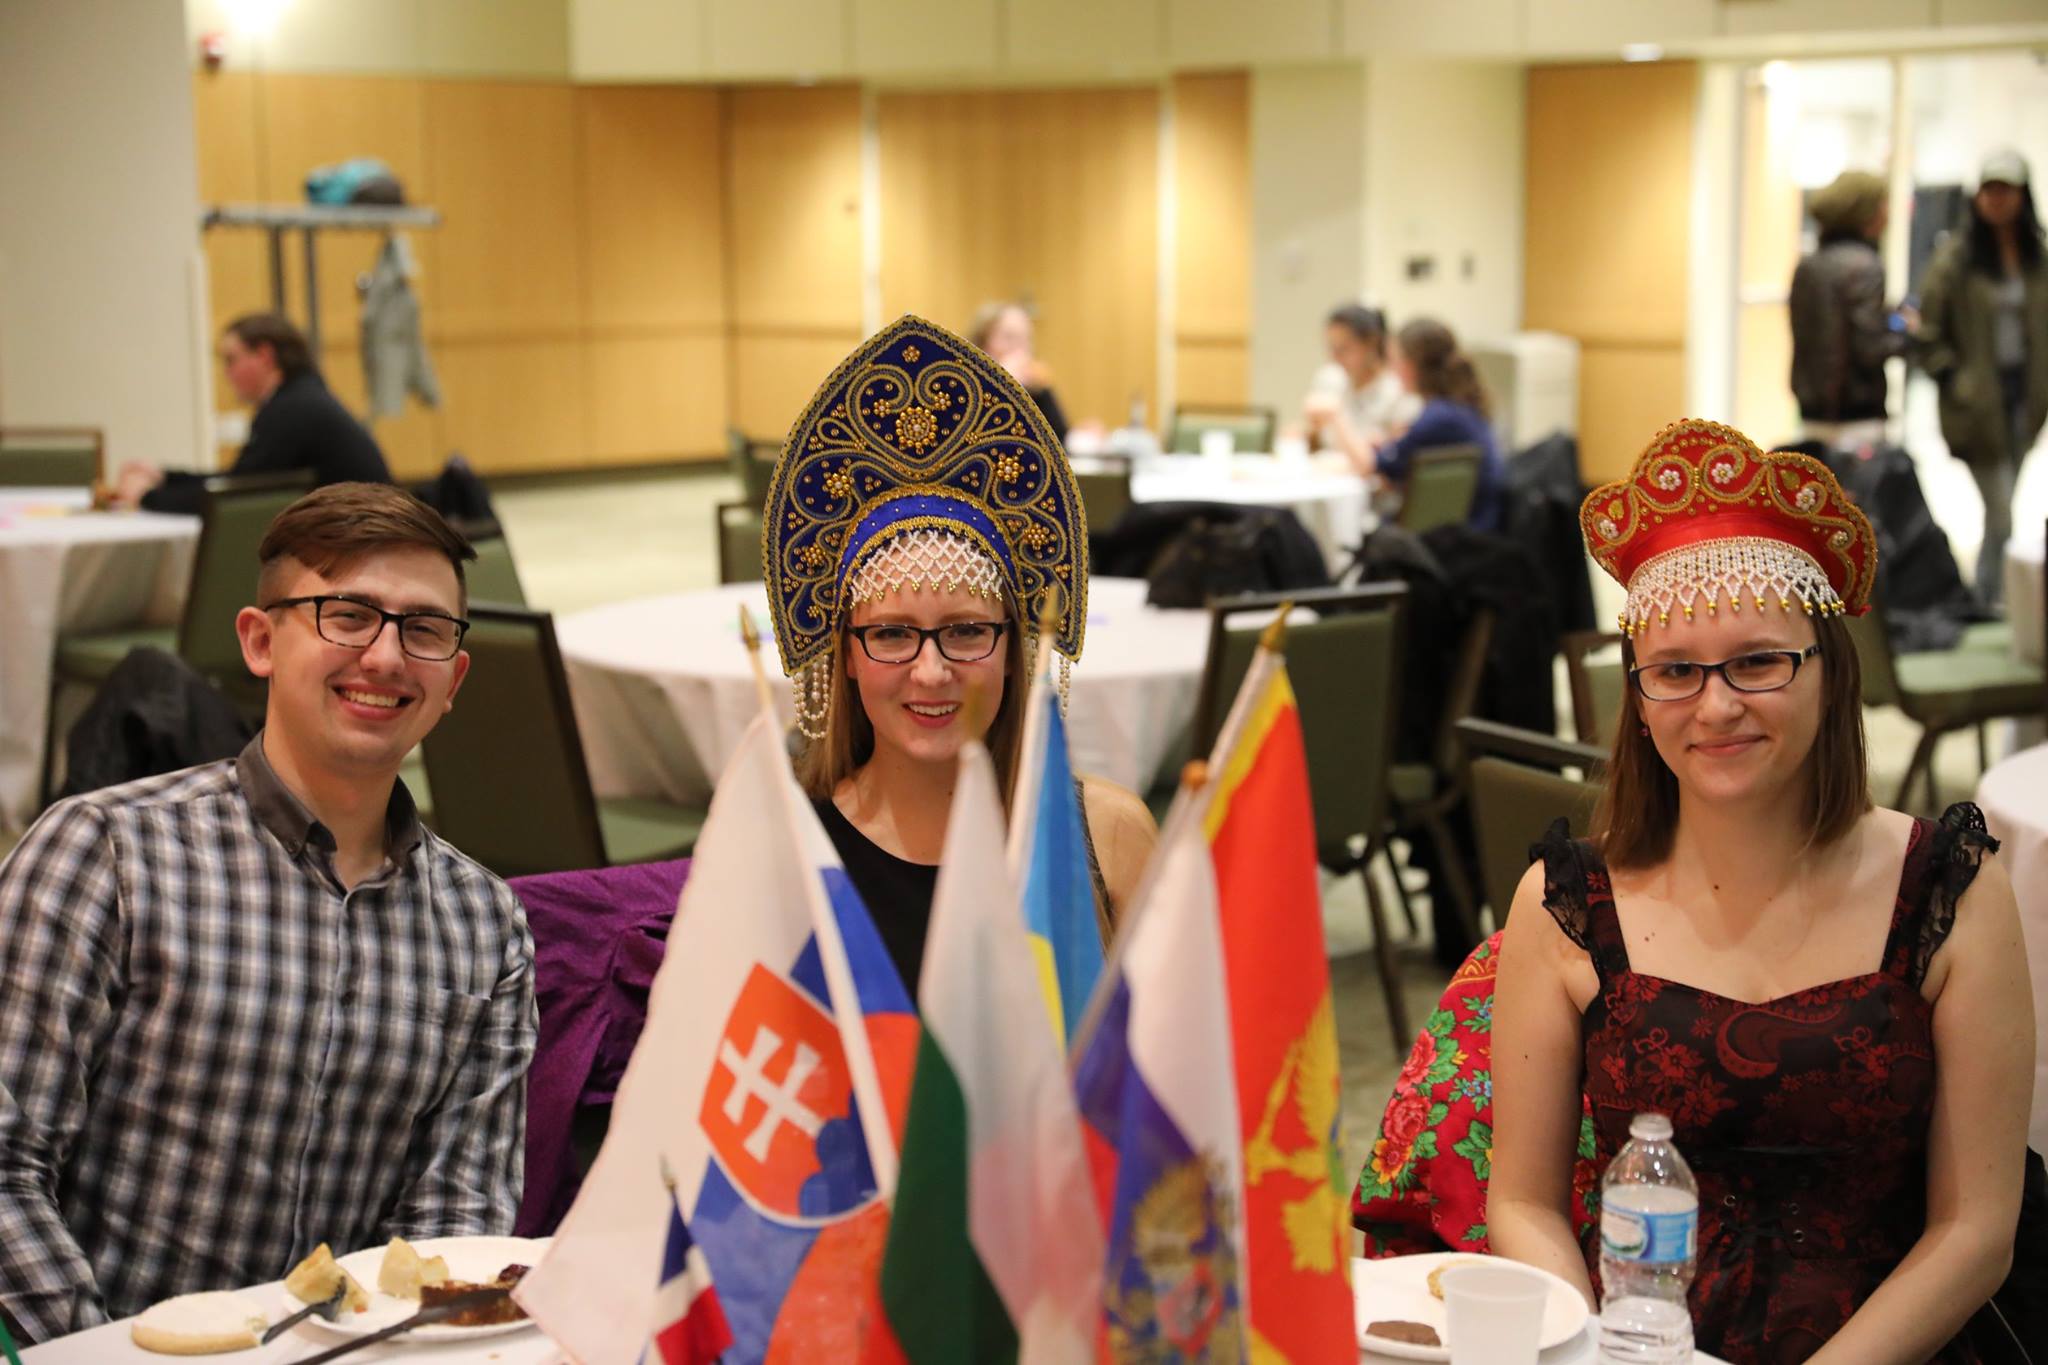 Three people sitting at a table with flags.